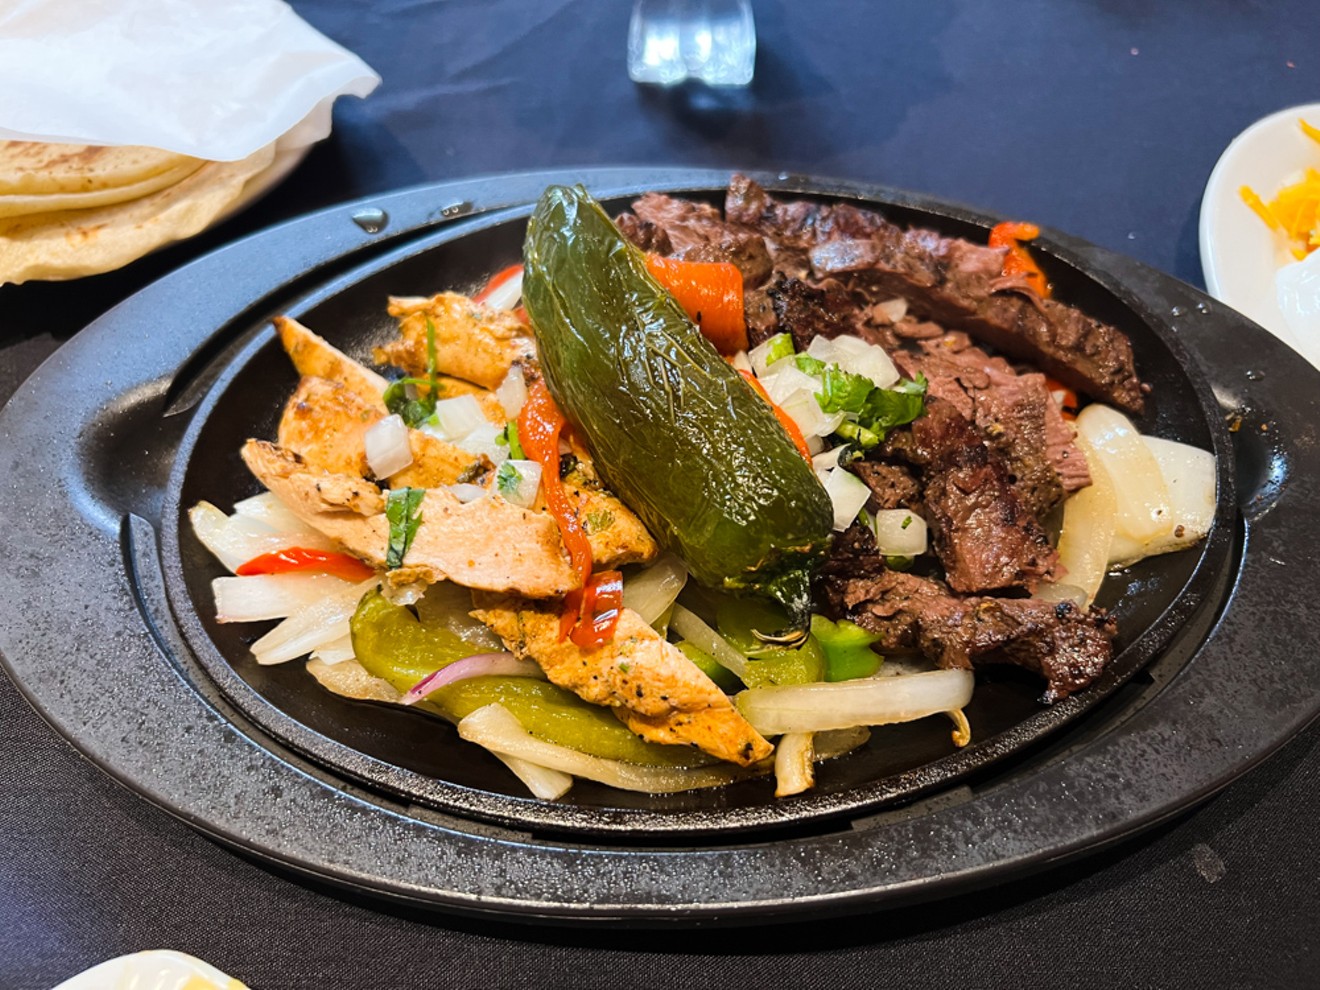 The Cuellar family introduced fajitas to Dallas, and at Casa Rosa, they're a textbook example of the fare.